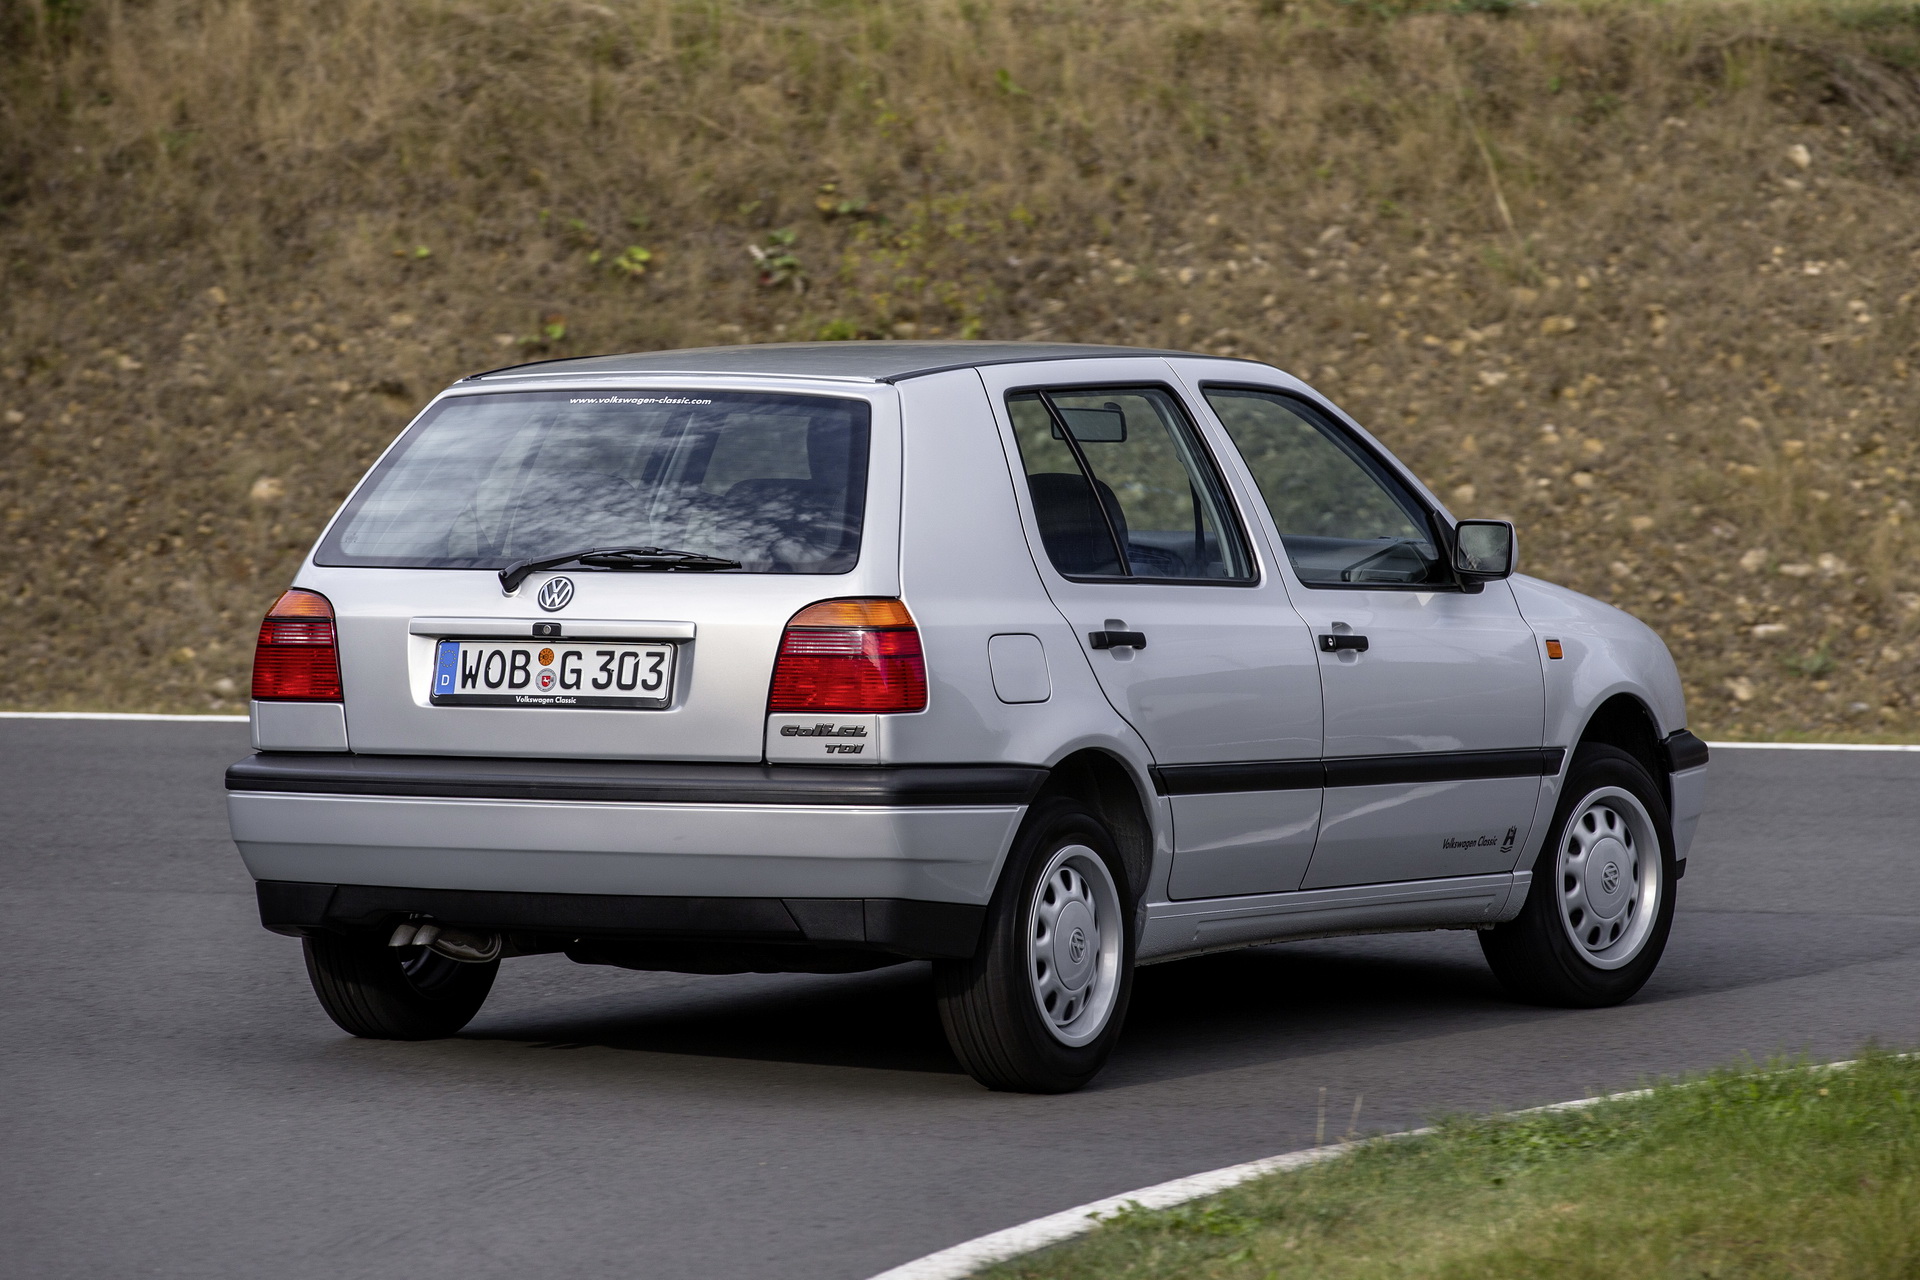 VW Golf Countdown: 1991-1996 Mk3 Was Full Of Safety Firsts But Not